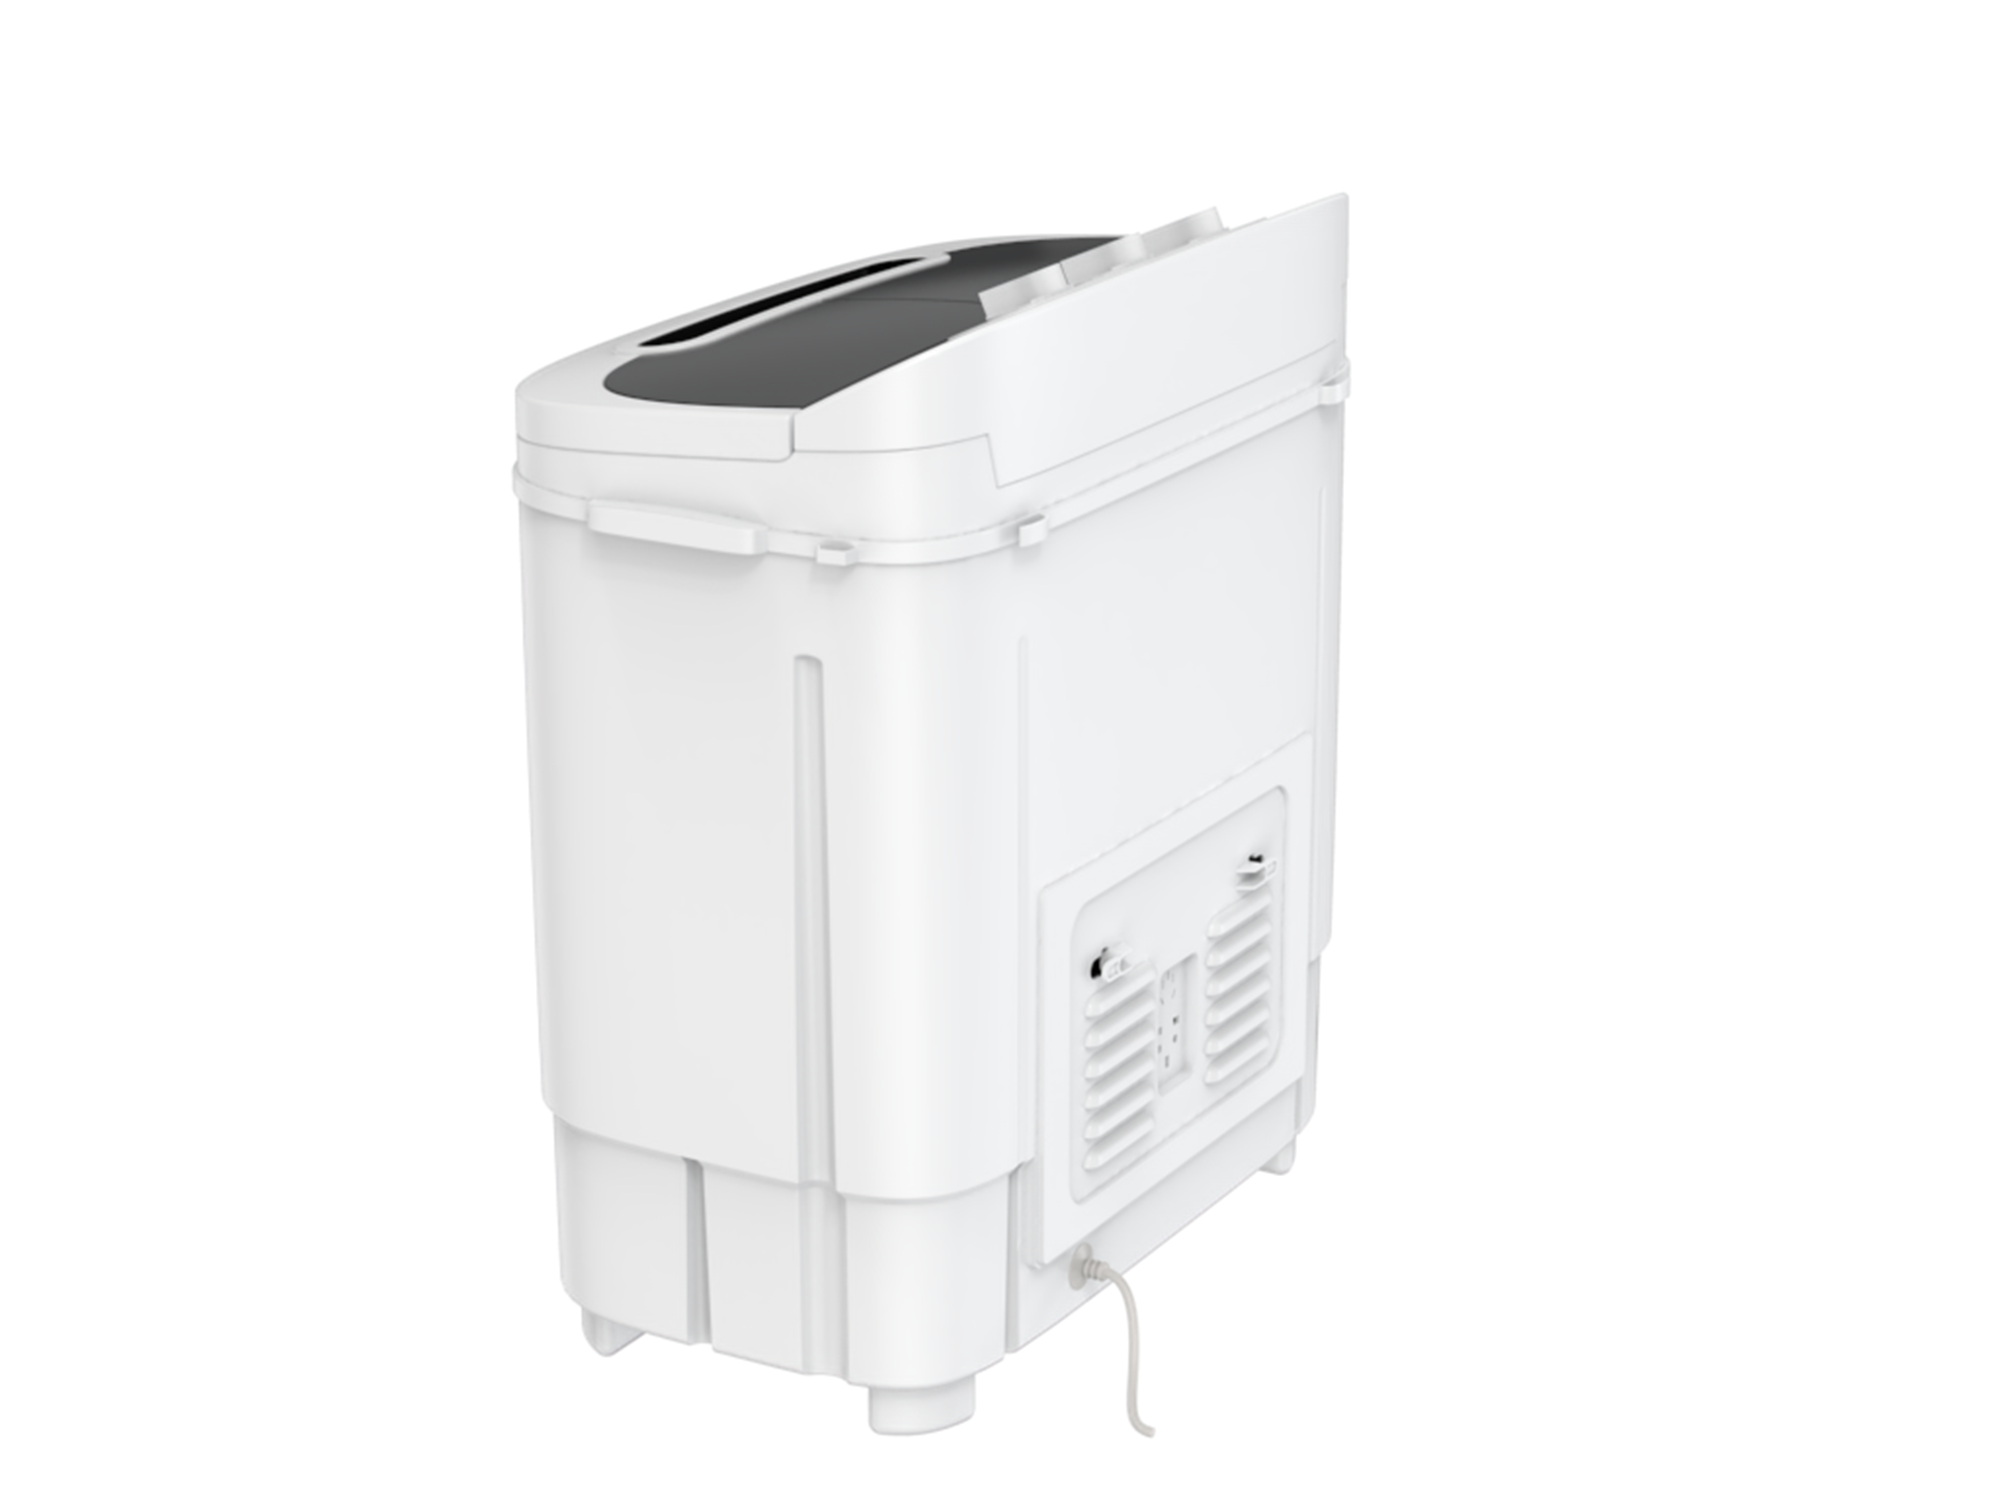 ZENY™ Portable Full-Automatic Washing Machine with 10 Programs 8 Water –  ZENY Products